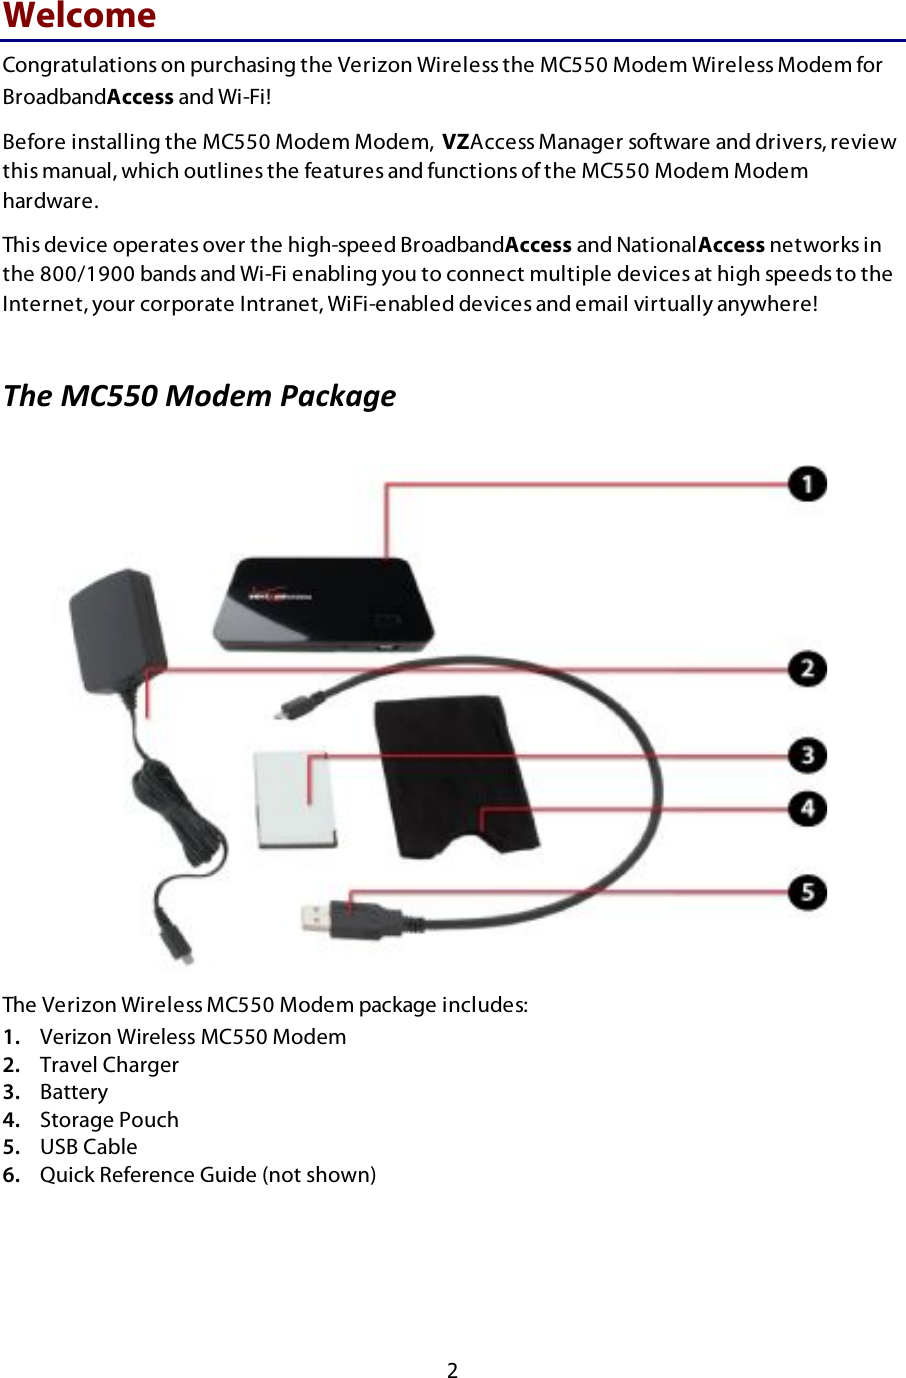  2 Welcome Congratulations on purchasing the Verizon Wireless the MC550 Modem Wireless Modem for BroadbandAccess and Wi-Fi! Before installing the MC550 Modem Modem,  VZAccess Manager software and drivers, review this manual, which outlines the features and functions of the MC550 Modem Modem hardware. This device operates over the high-speed BroadbandAccess and NationalAccess networks in the 800/1900 bands and Wi-Fi enabling you to connect multiple devices at high speeds to the Internet, your corporate Intranet, WiFi-enabled devices and email virtually anywhere!  !!&quot;#$%&amp;&apos;&apos;($%)*#+$,-./-0#$  The Verizon Wireless MC550 Modem package includes: 1. Verizon Wireless MC550 Modem  2. Travel Charger 3. Battery 4. Storage Pouch 5. USB Cable 6. Quick Reference Guide (not shown) !